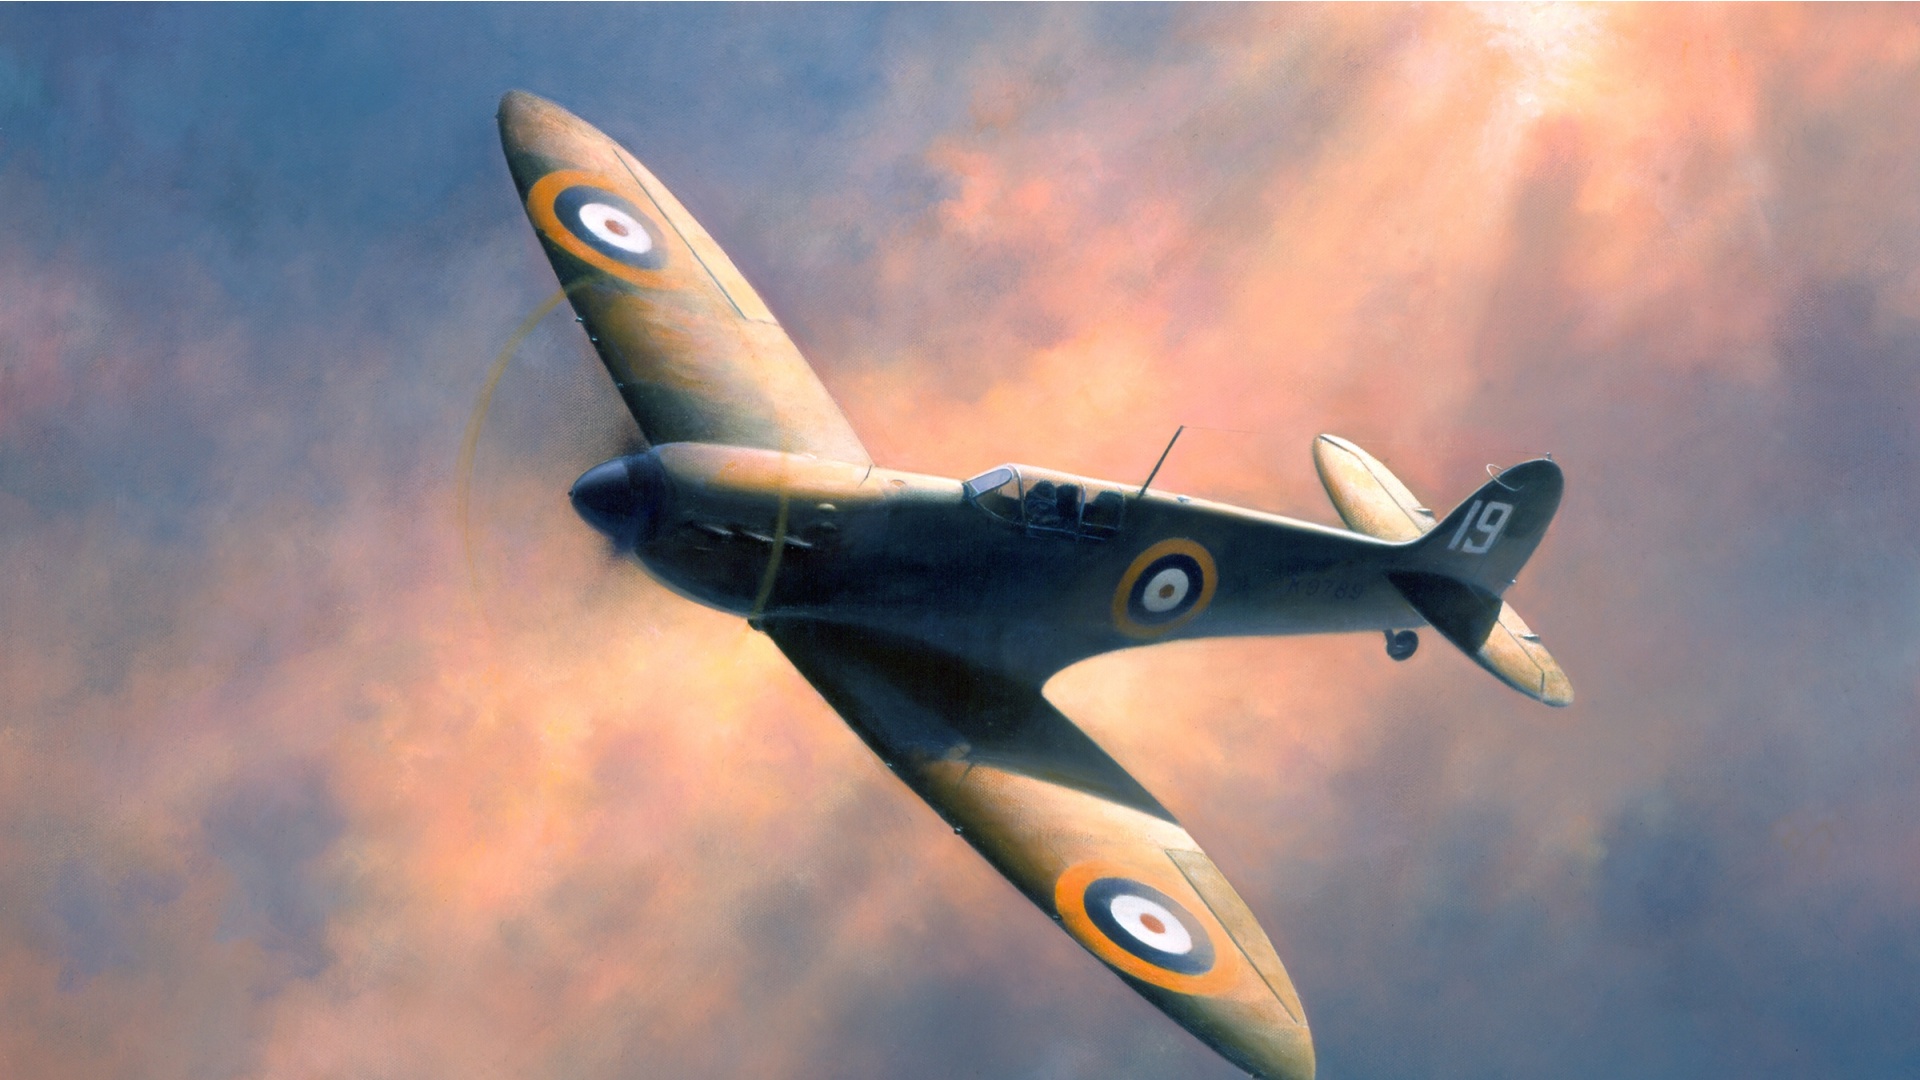 Wwii Flying Spitfire Painting - Airplane Painting , HD Wallpaper & Backgrounds